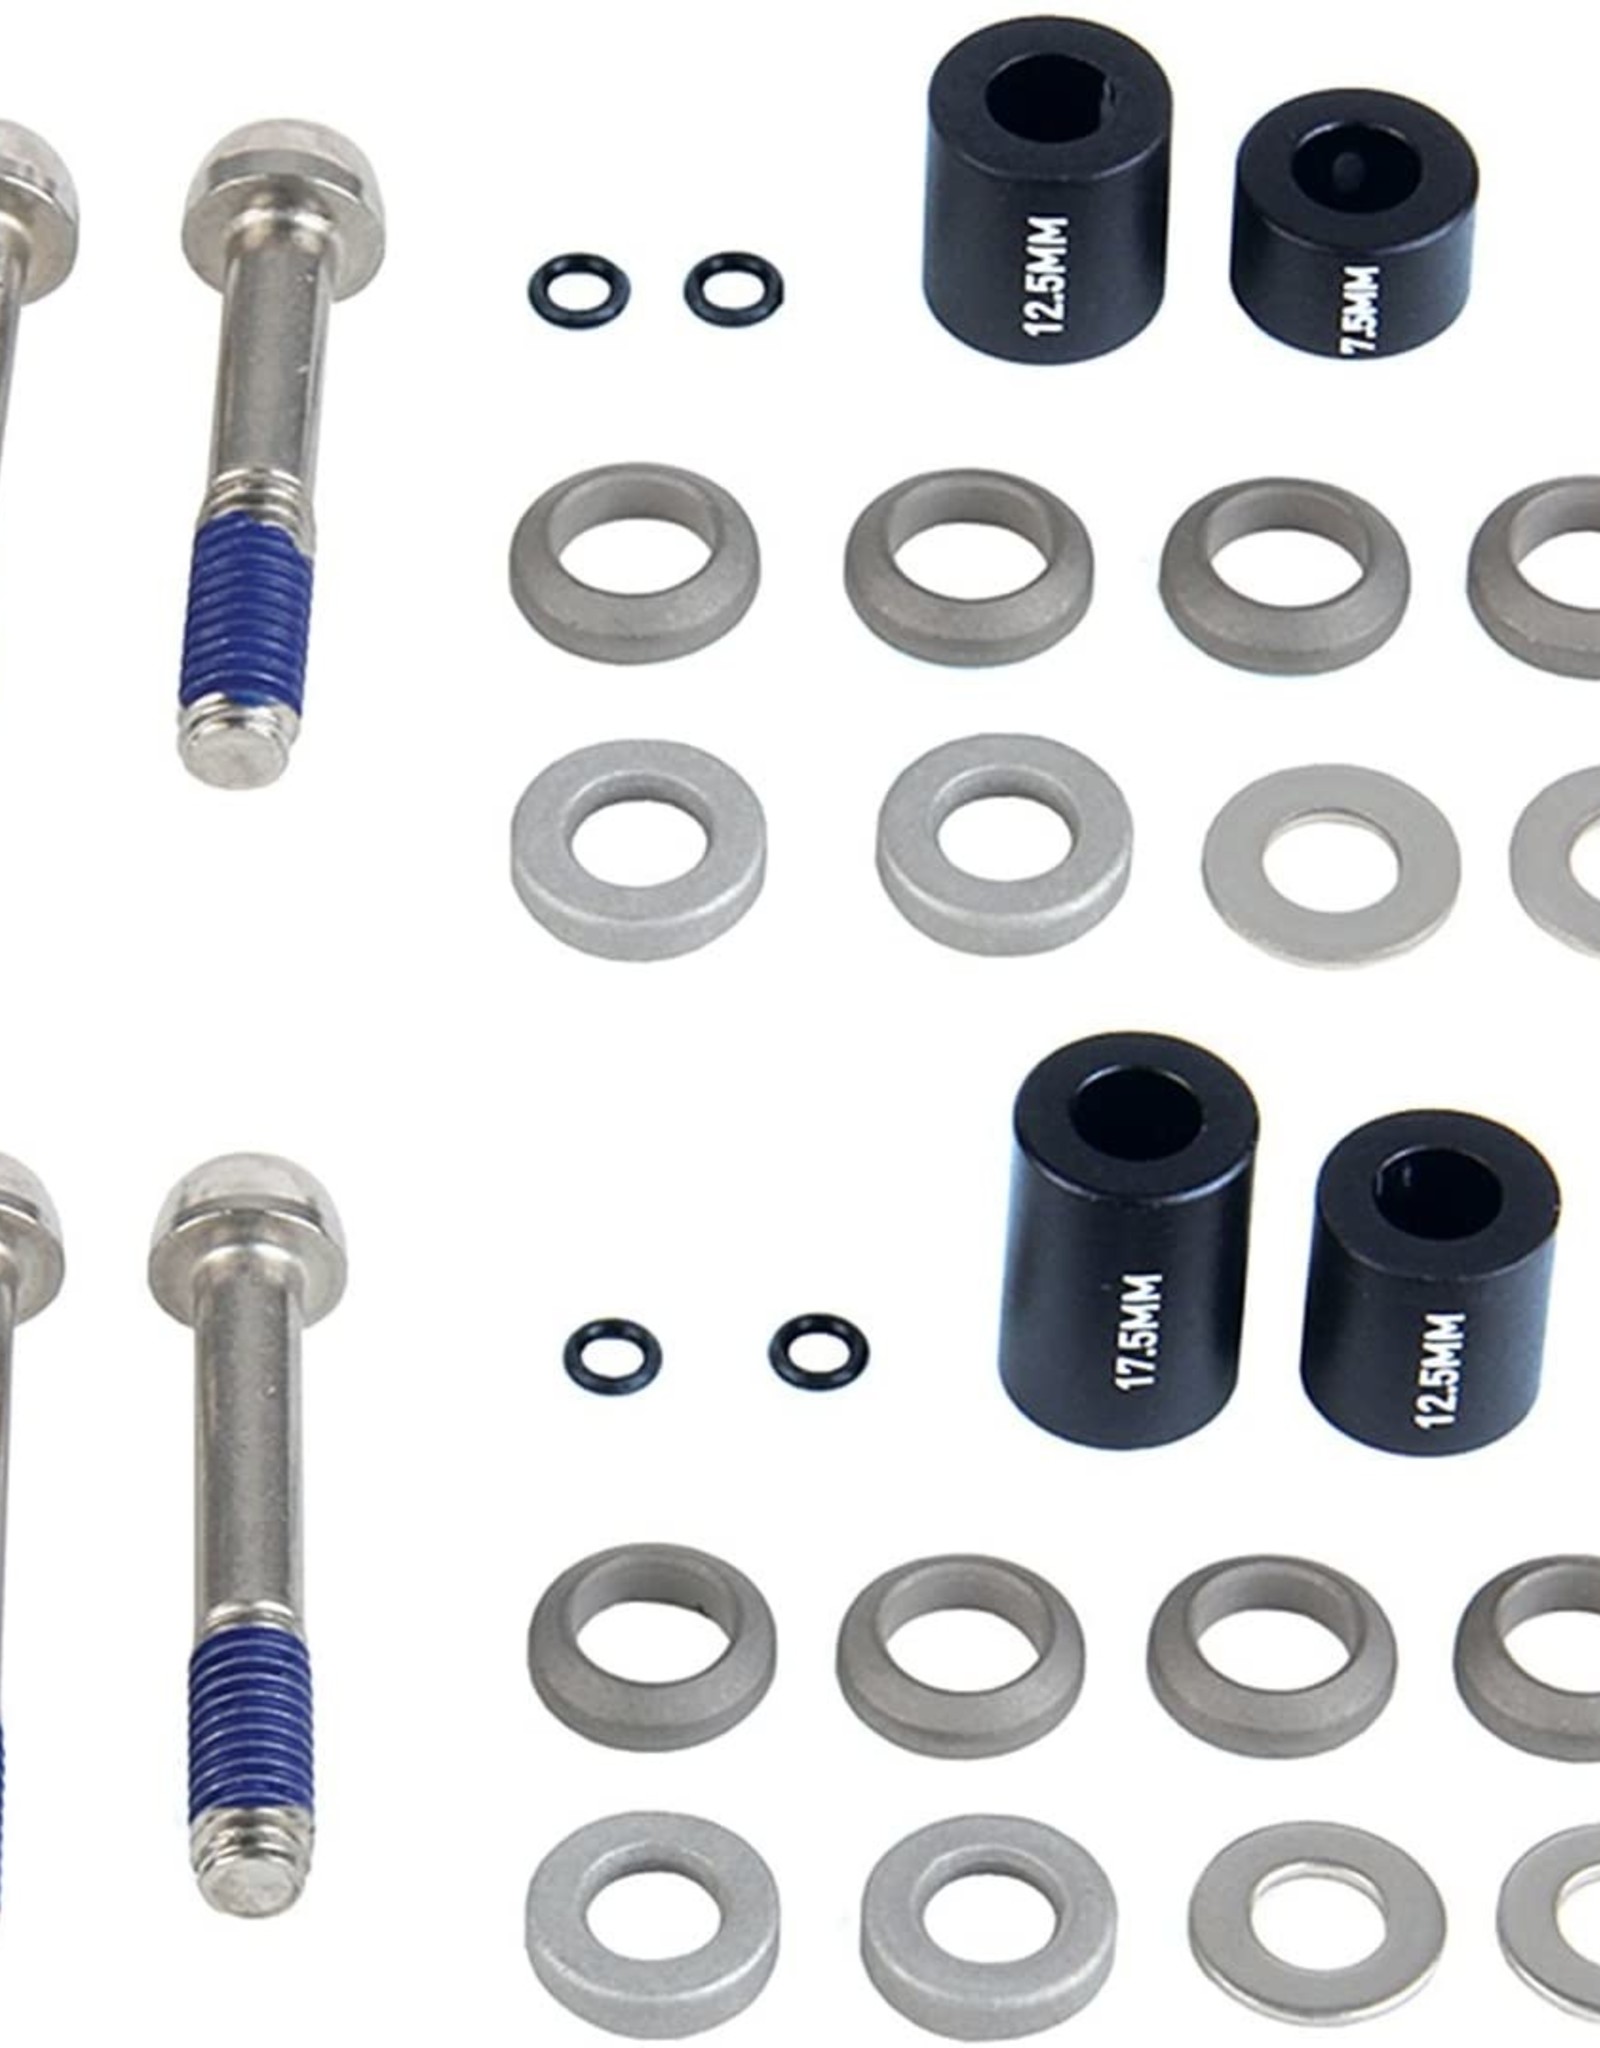 Post Spacer Set - 20 S (Front 180/Rear 160), Includes Stainless Caliper Mounting Bolts (CPS & Standard)